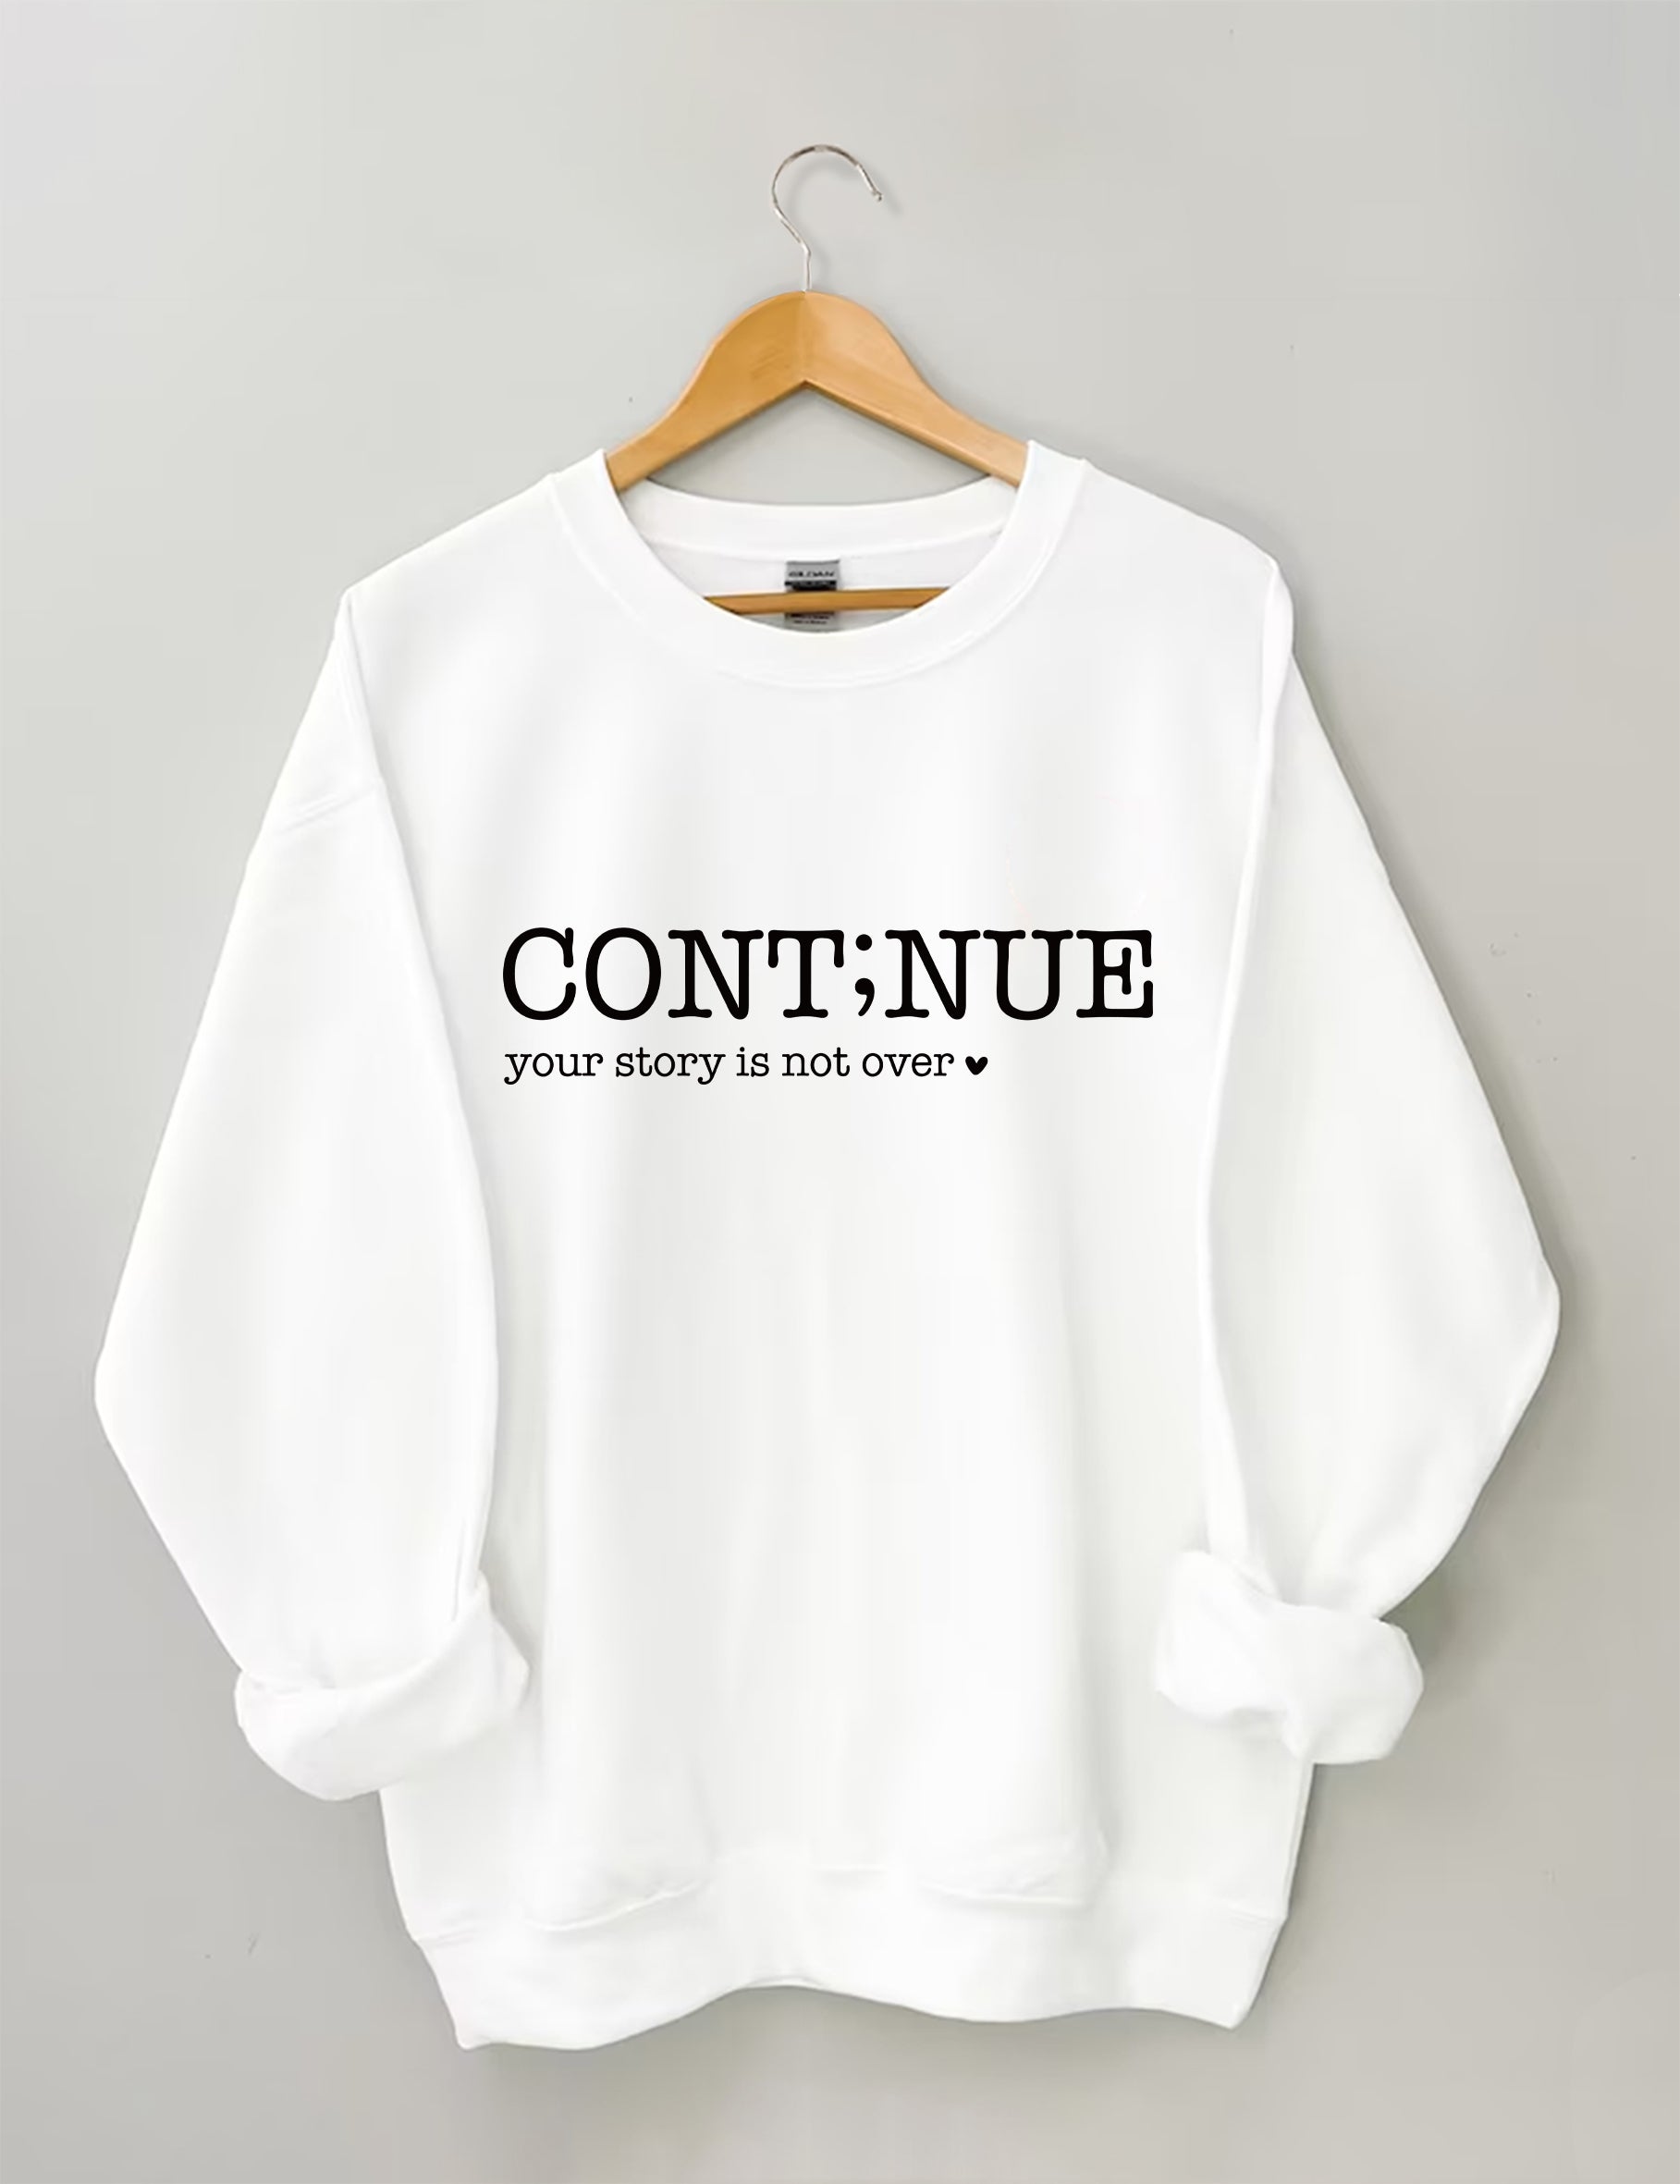 Continue Your Story Is Not Over Sweatshirt